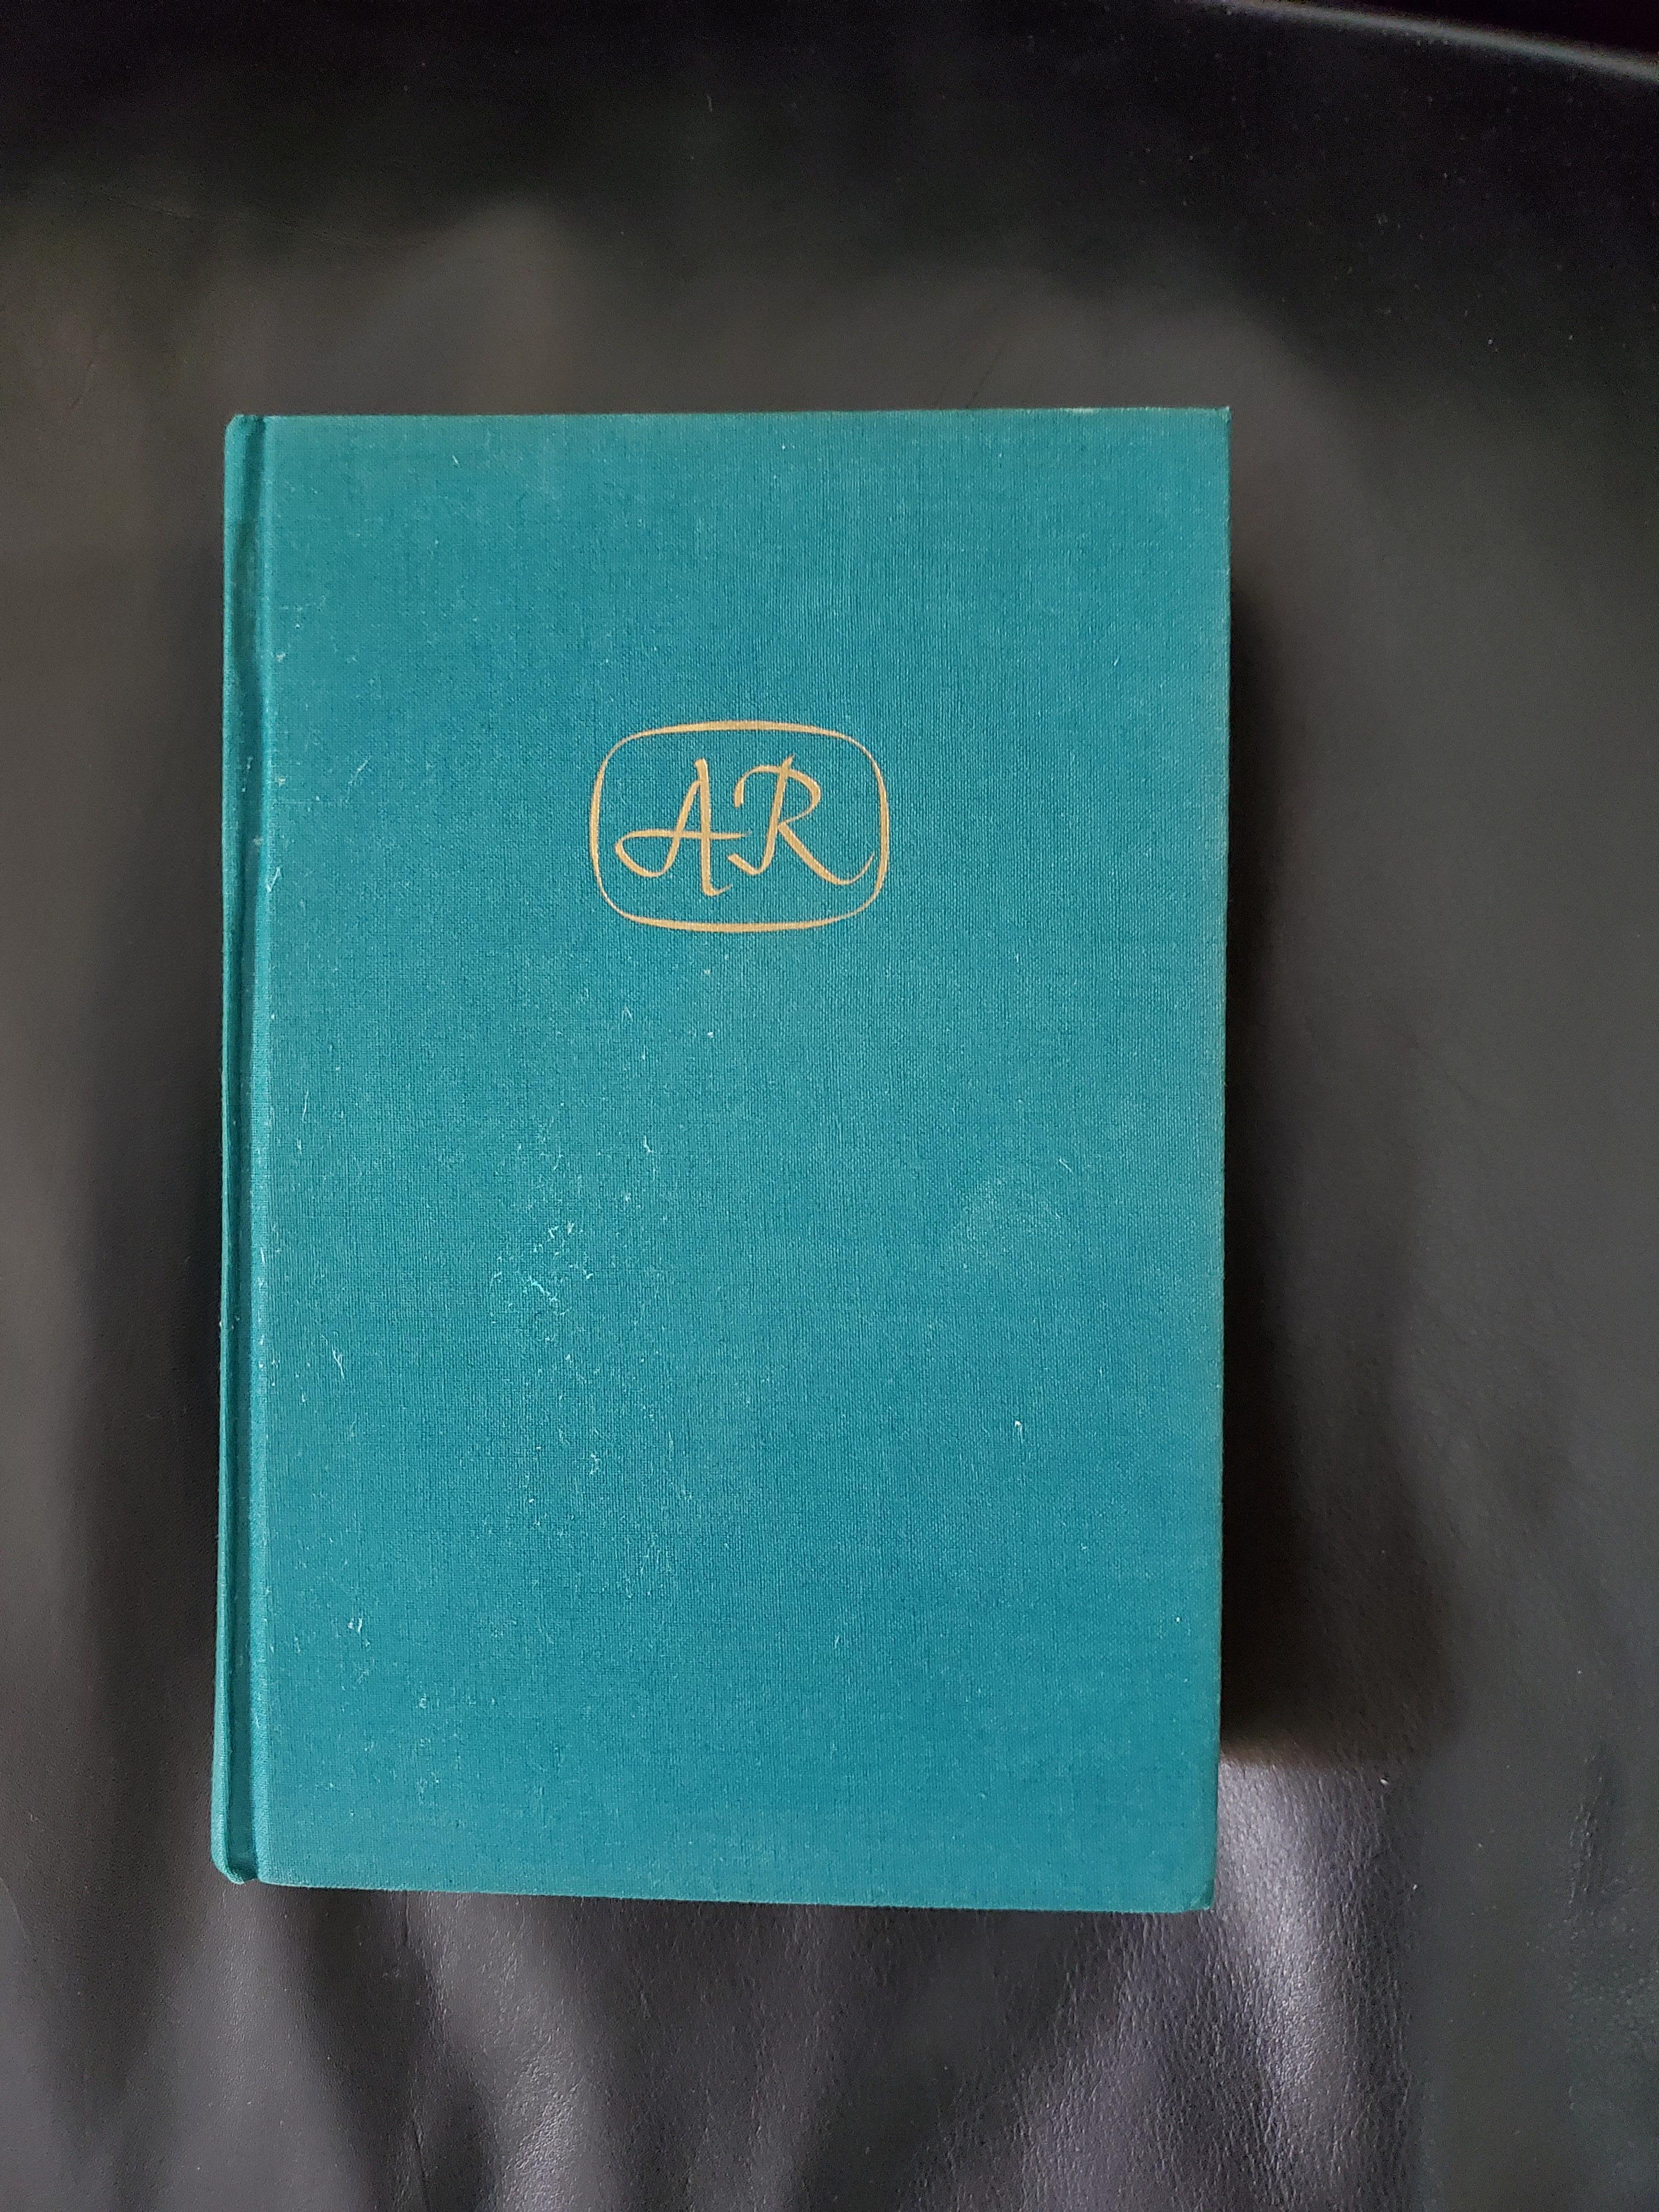 Ayn Rand Atlas Shrugged 
Signed by Rand
Amazing book very rare
Signed by rand on the front end paper
No writings 
With dust jackets in clean conditions
Not price clipped
No writings on this book
Not restored
Very very clean book
Not